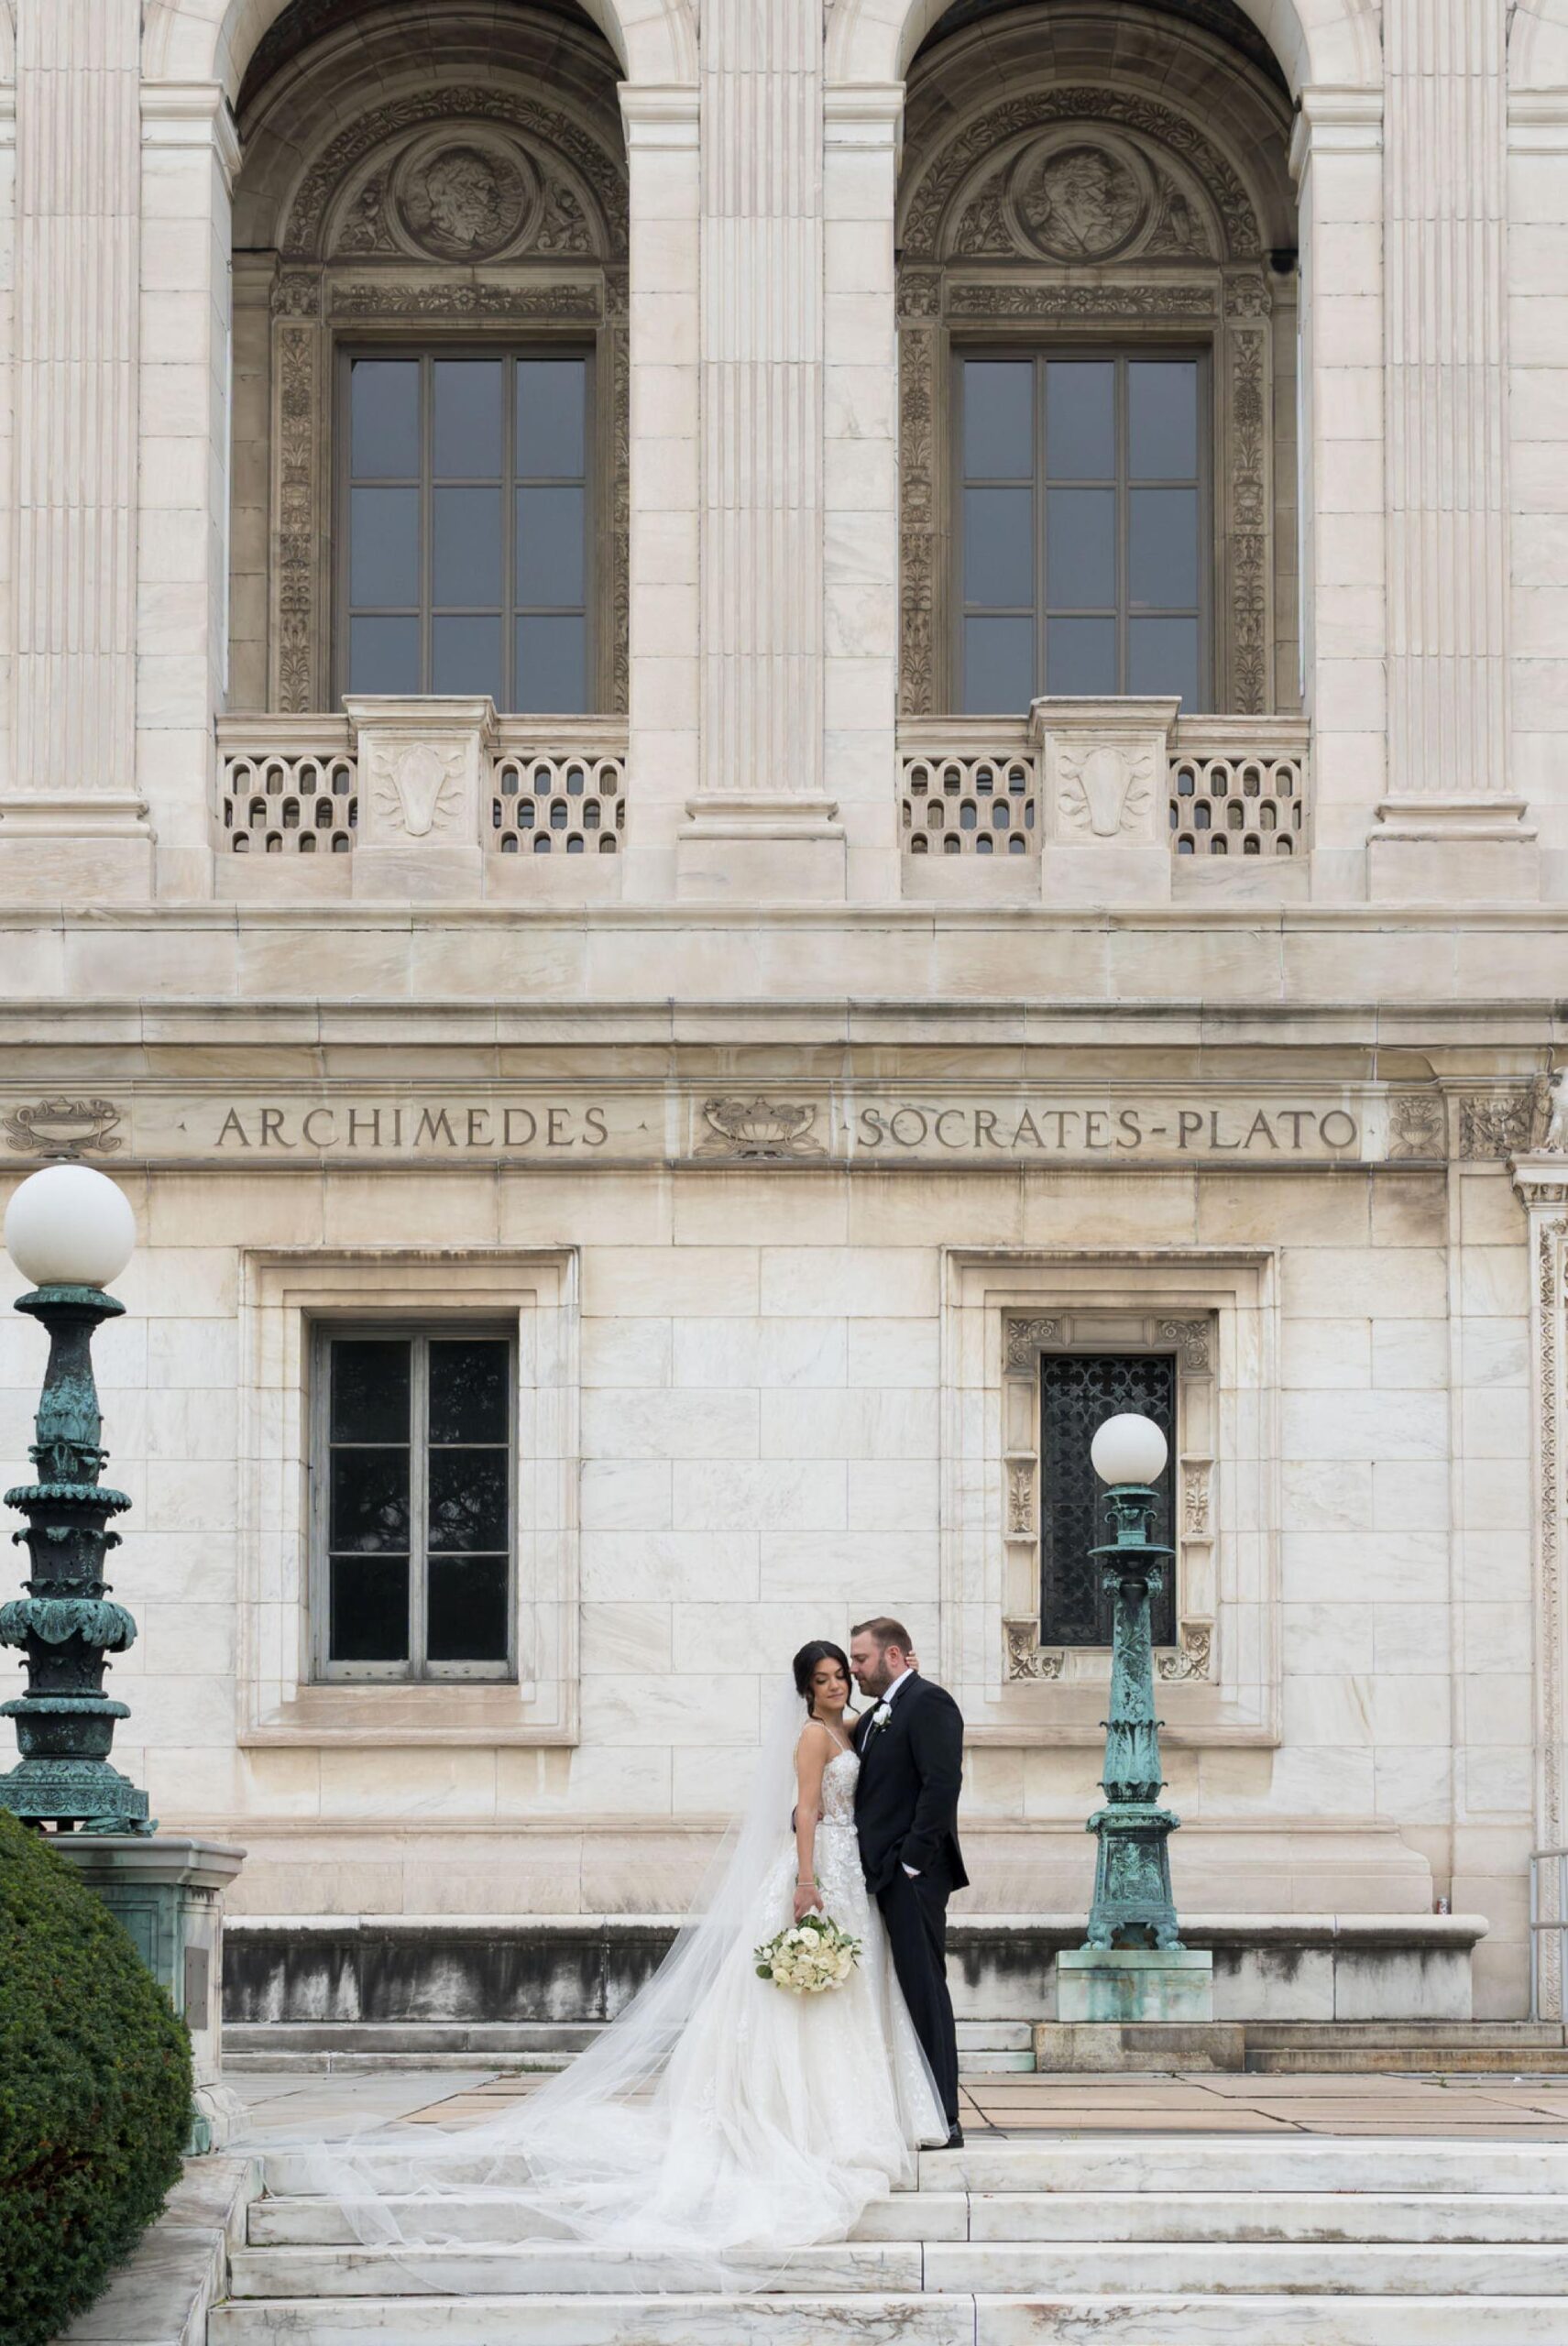 A bride and groom pose on steps in downtown Detroit on their wedding day.  